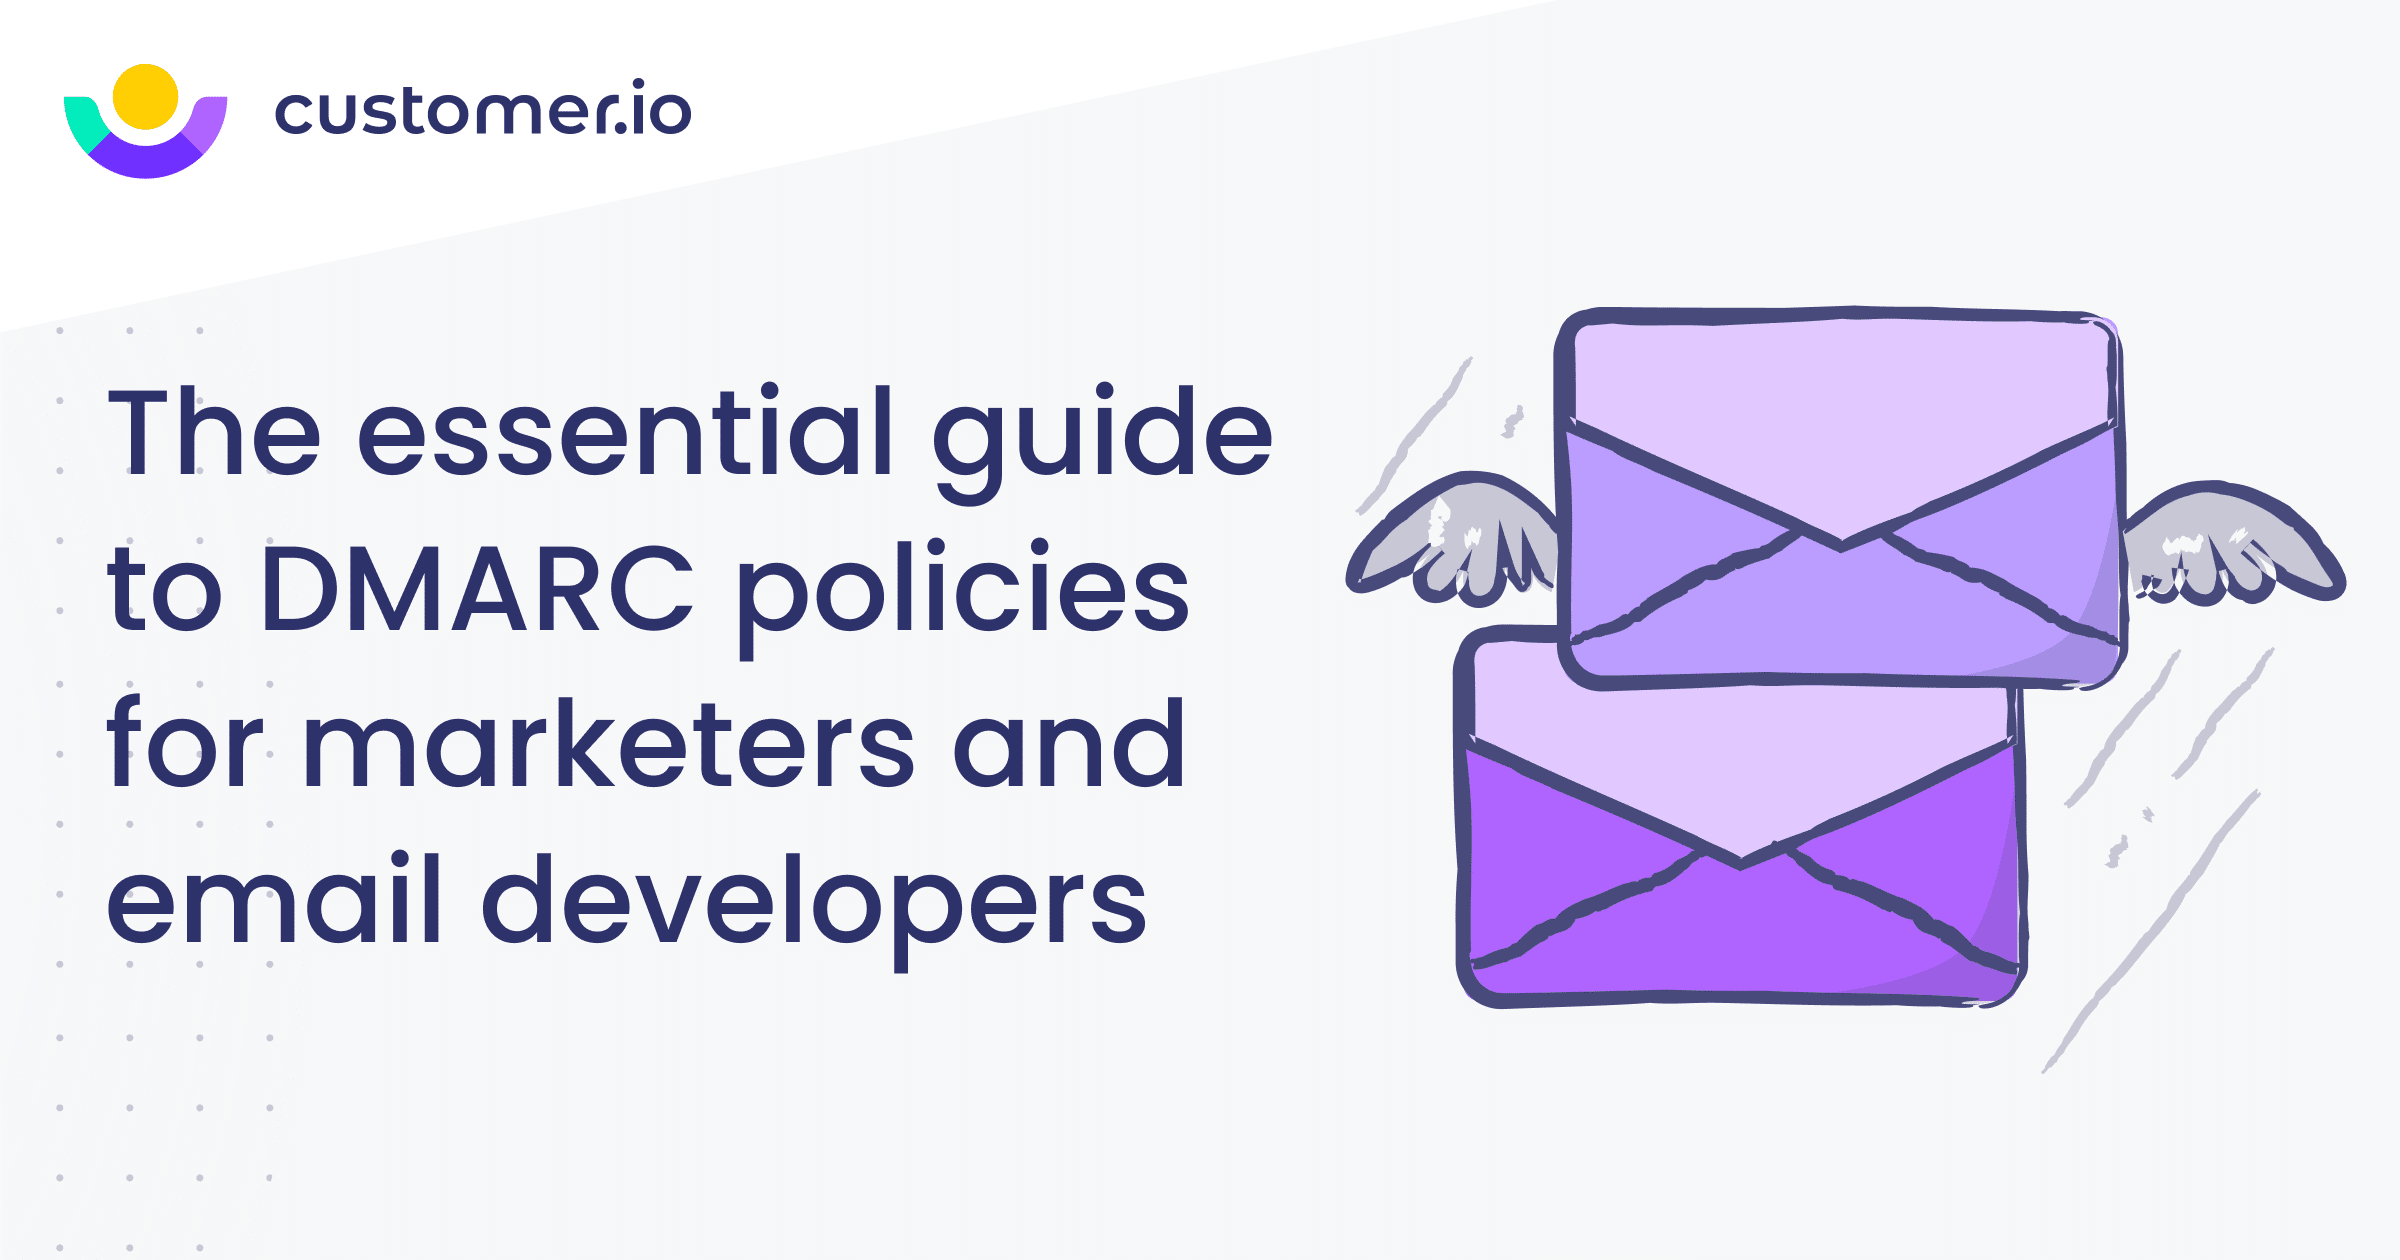 The essential guide to DMARC policies